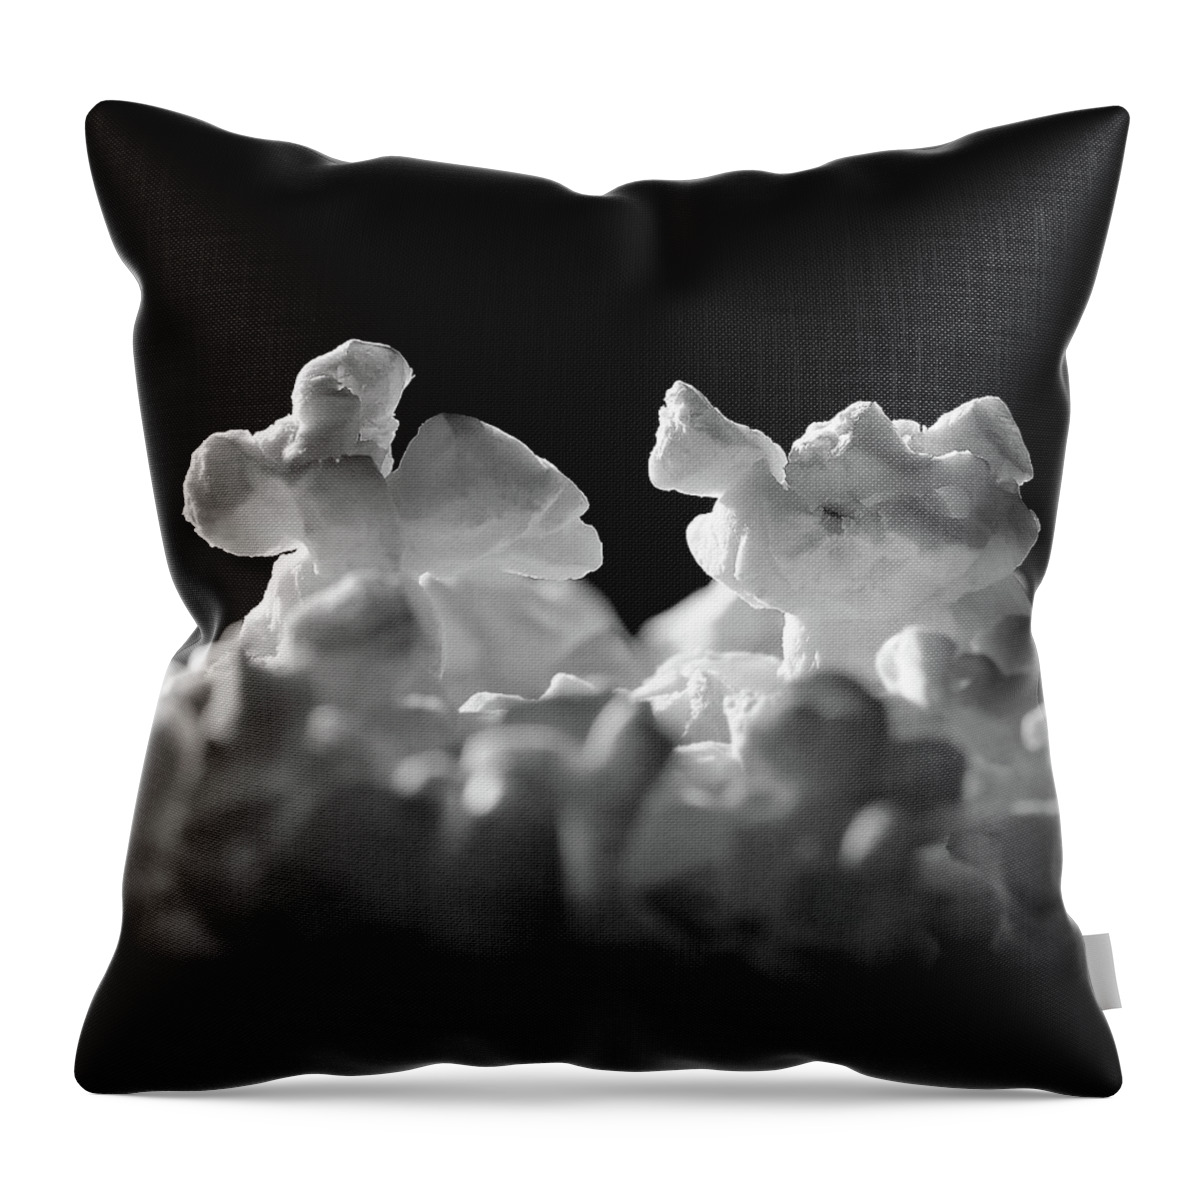 Popcorn Throw Pillow featuring the photograph Popcorn Paso Doble by Ted Keller